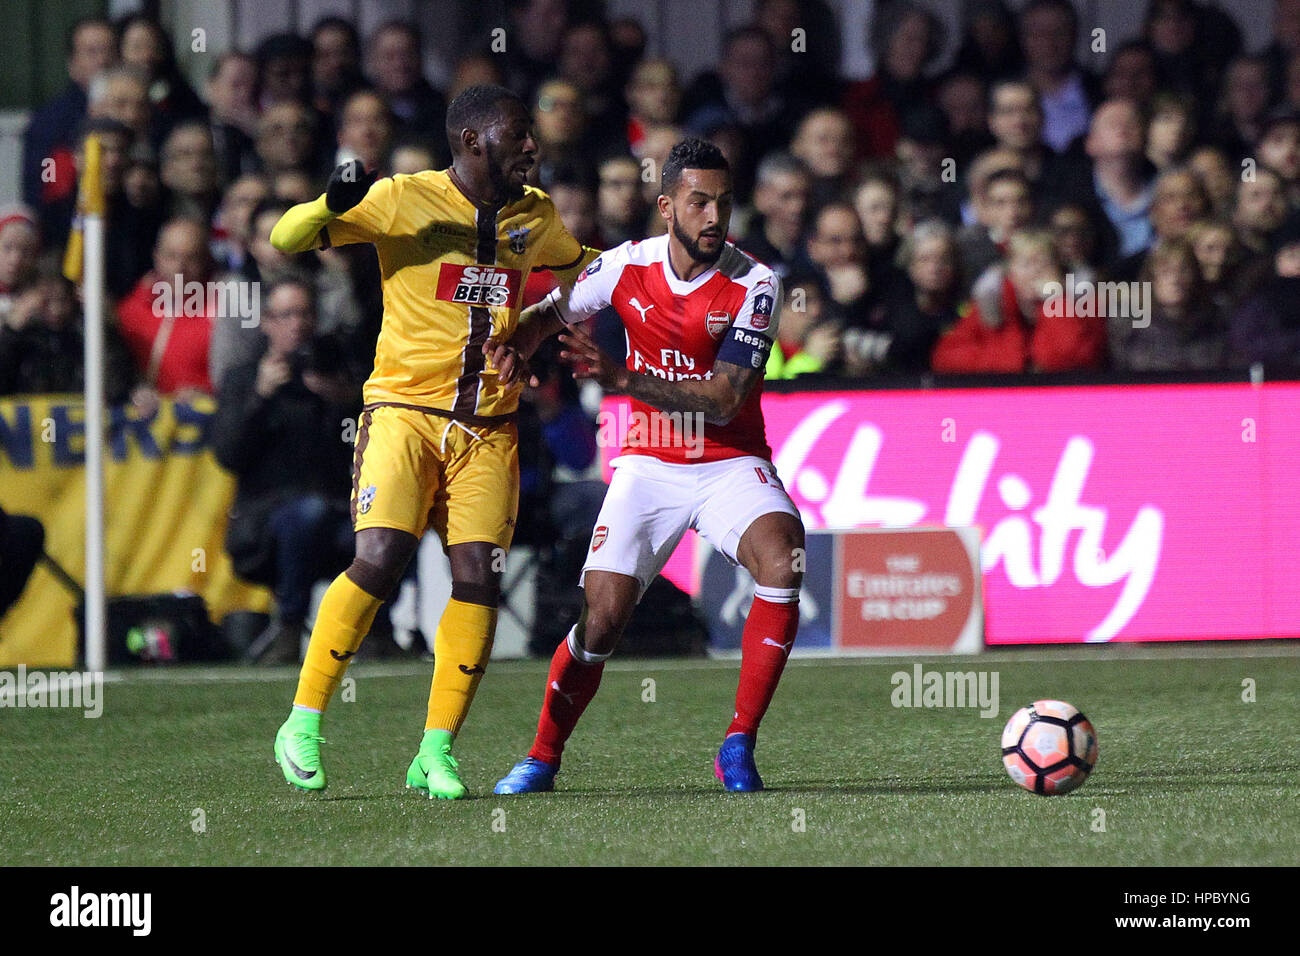 Sutton, UK. 20th Feb, 2017. Theo Walcott of Arsenal and Roarie Deacon of Sutton United in action during the FA Cup Fifth Round match between Sutton United and Arsenal at Borough Sports Ground on February 20th 2017 in Sutton, England. Credit: Daniel Chesterton/Alamy Live News Stock Photo